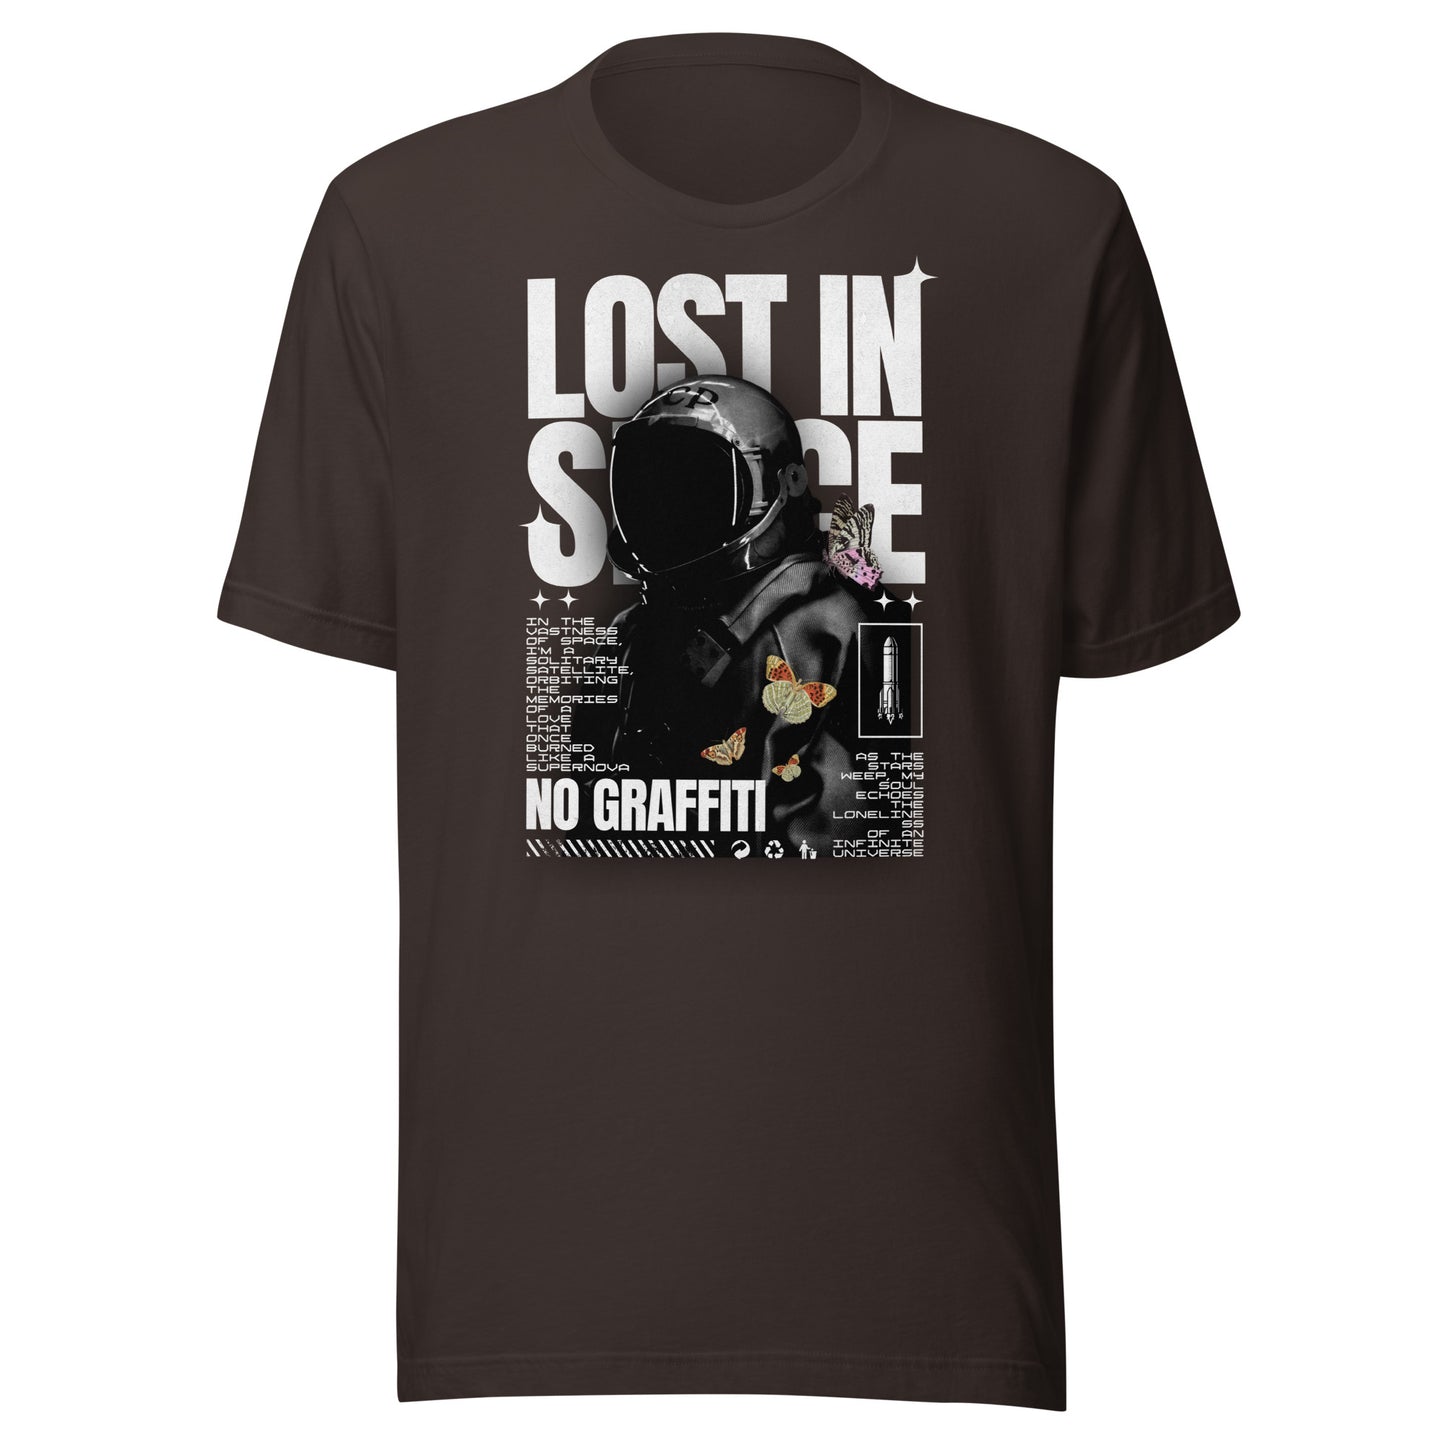 Lost In Space Typographic Shirt